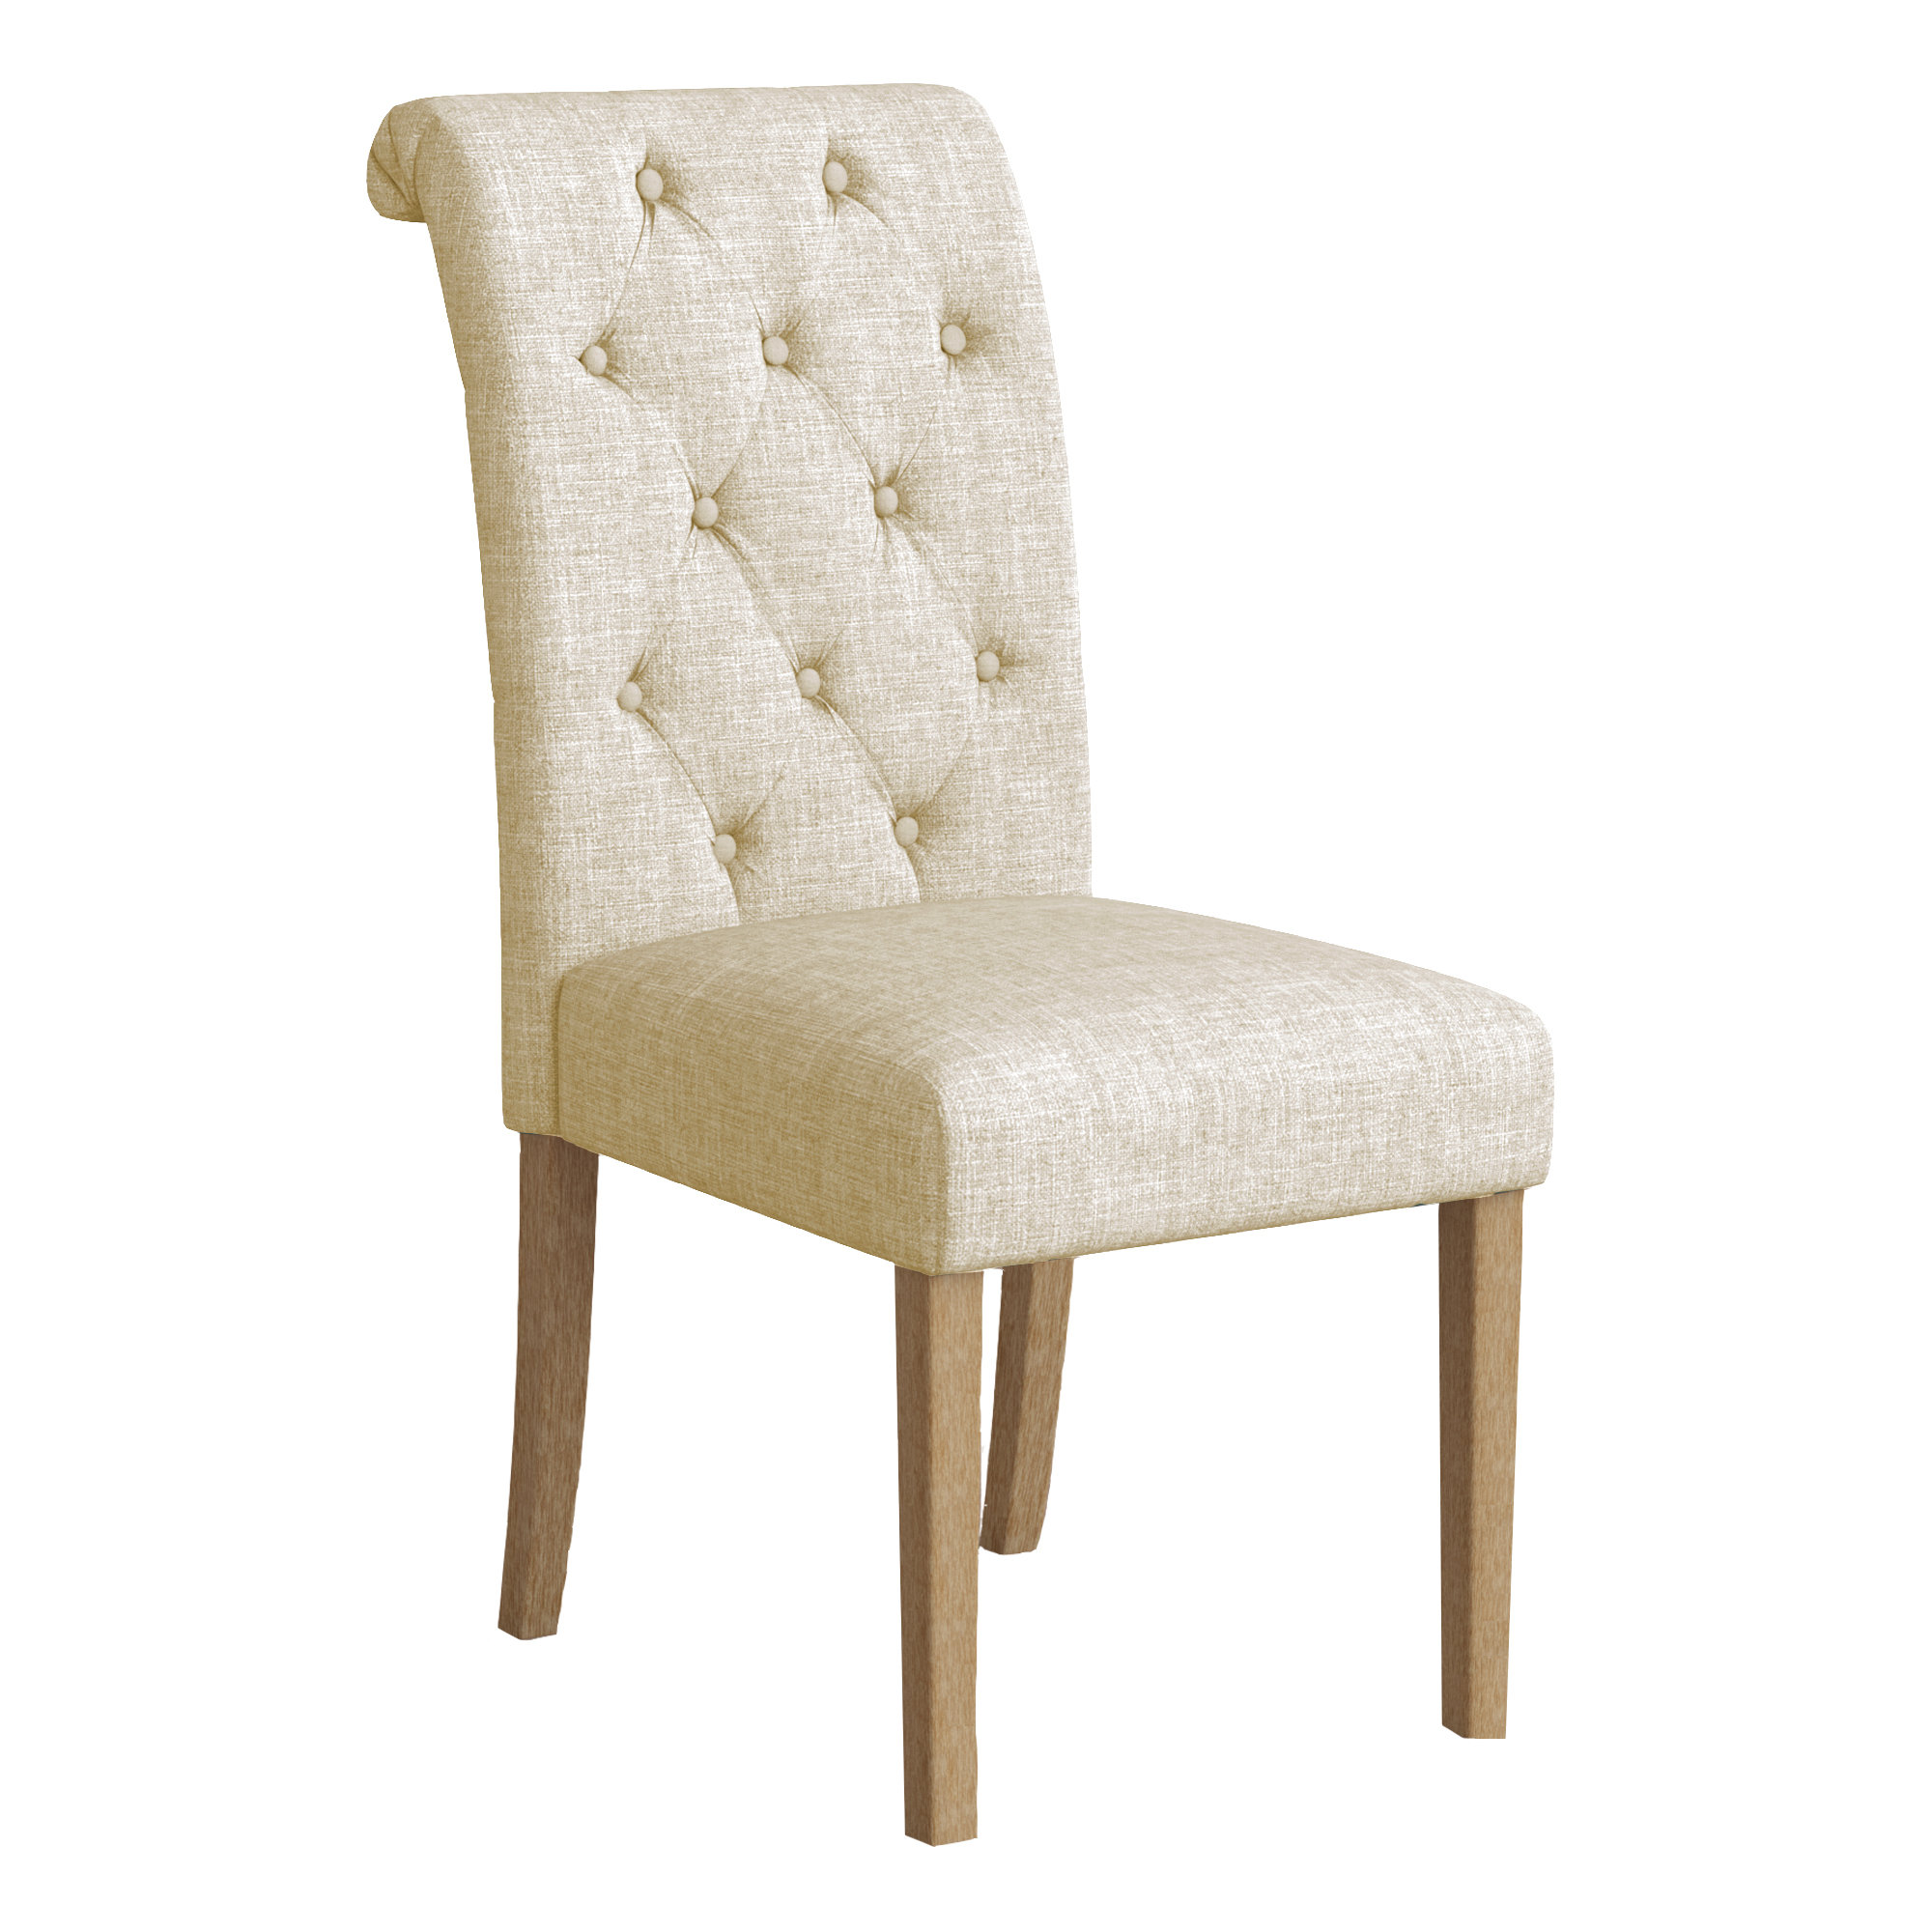 Dining Chair Bungalow Rose Kenleigh Solid Wood Button-Tufted Side Chair & Reviews |  CDGLCUB